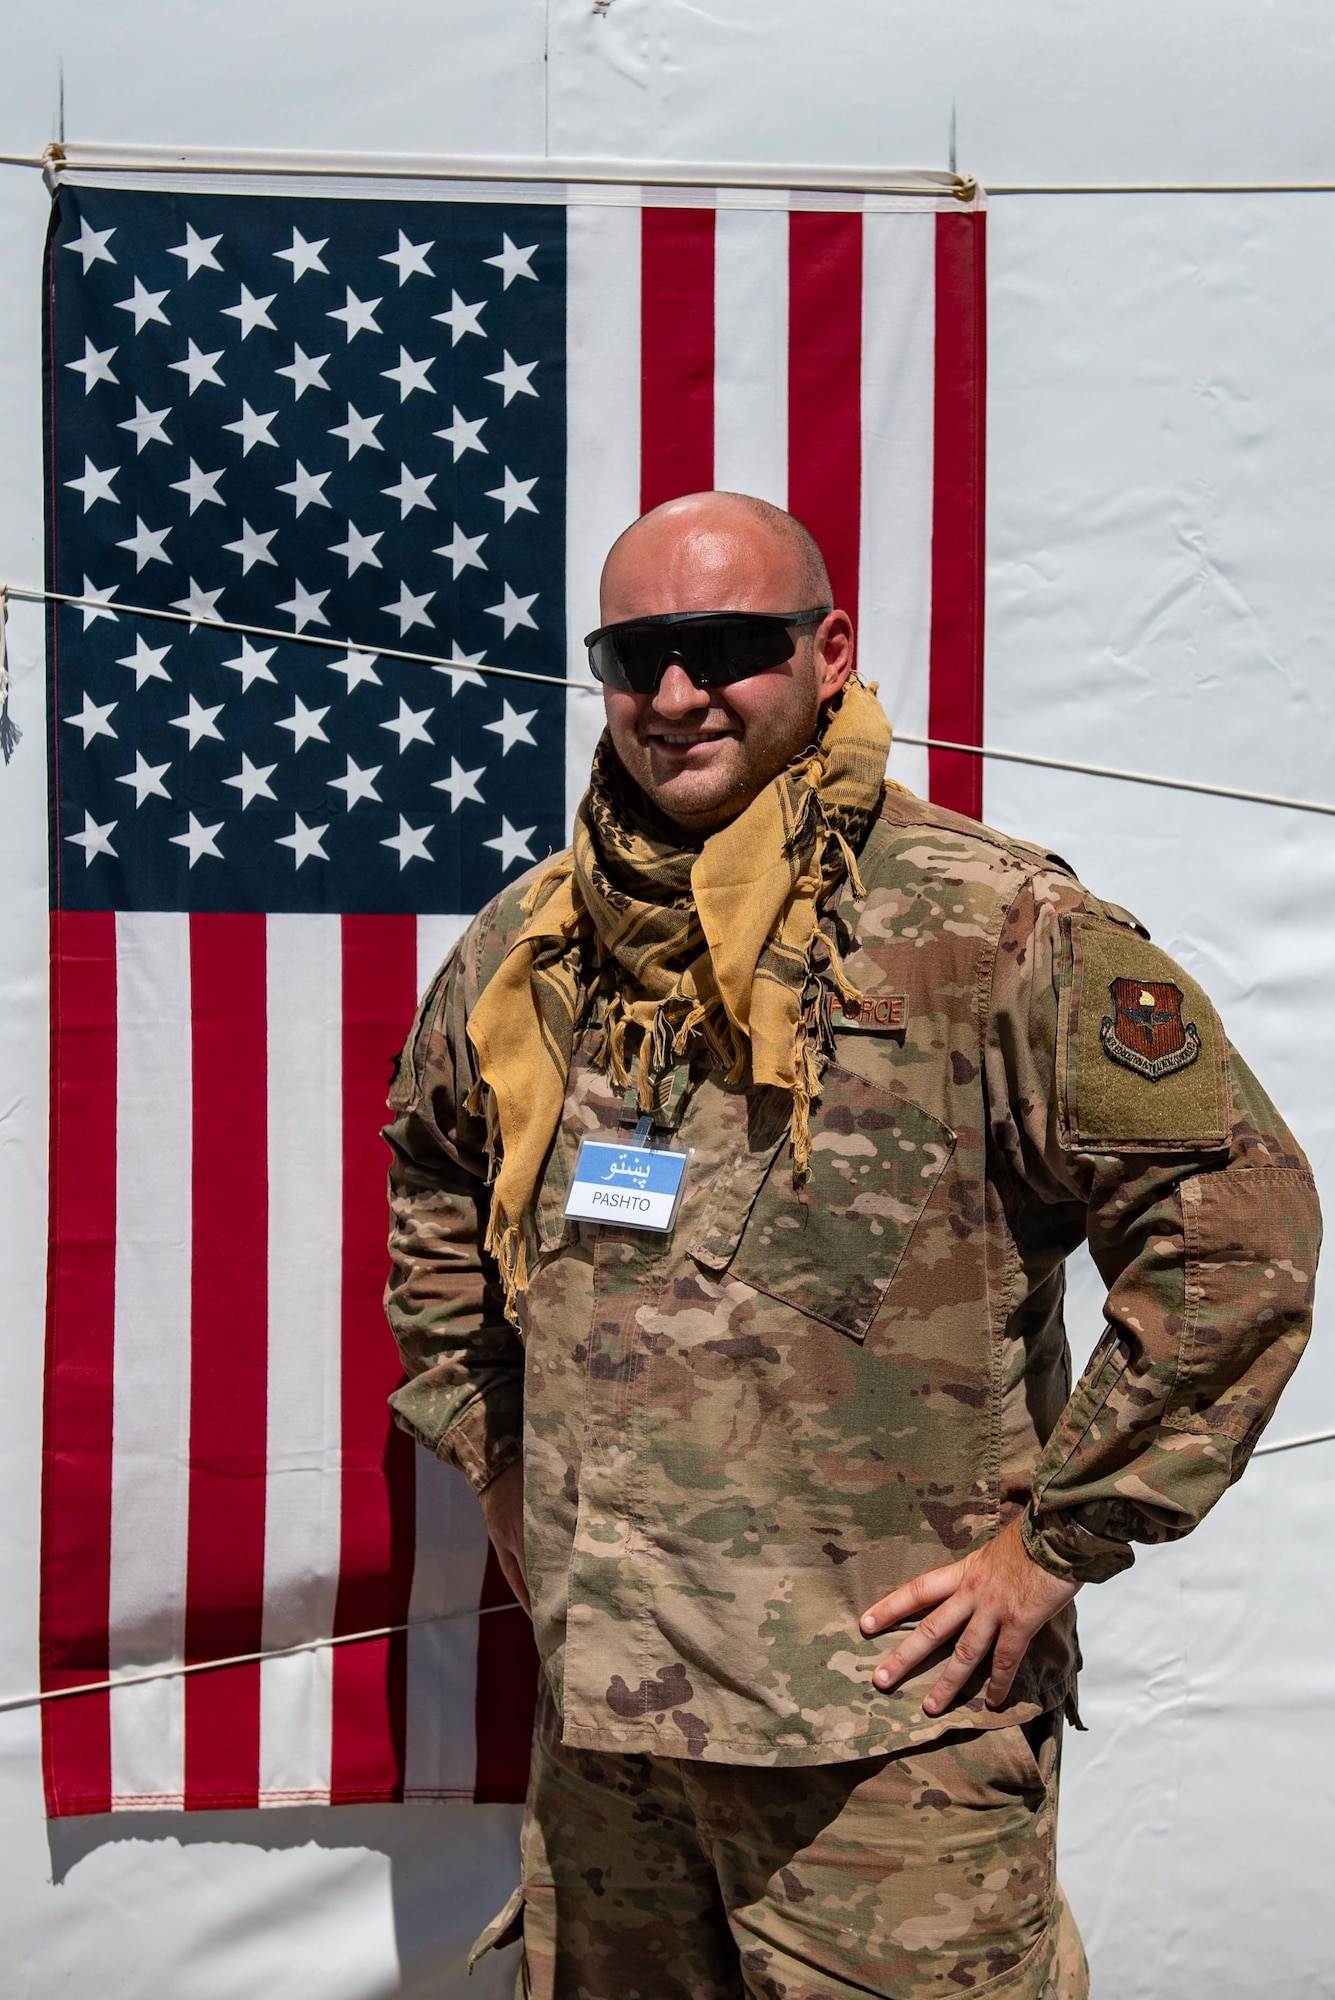 Tech. Sgt. Steven Toma, Task Force-Holloman interpreter deployed from Goodfellow Air Force Base, Texas, poses for a photo at Aman Omid Village on Holloman Air Force Base, New Mexico, Sept. 23, 2021. The Department of Defense, through U.S. Northern Command, and in support of the Department of State and Department of Homeland Security, is providing transportation, temporary housing, medical screening, and general support for at least 50,000 Afghan evacuees at suitable facilities, in permanent or temporary structures, as quickly as possible. This initiative provides Afghan evacuees essential support at secure locations outside Afghanistan. (U.S. Air Force photo by Staff Sgt. Kenneth Boyton)